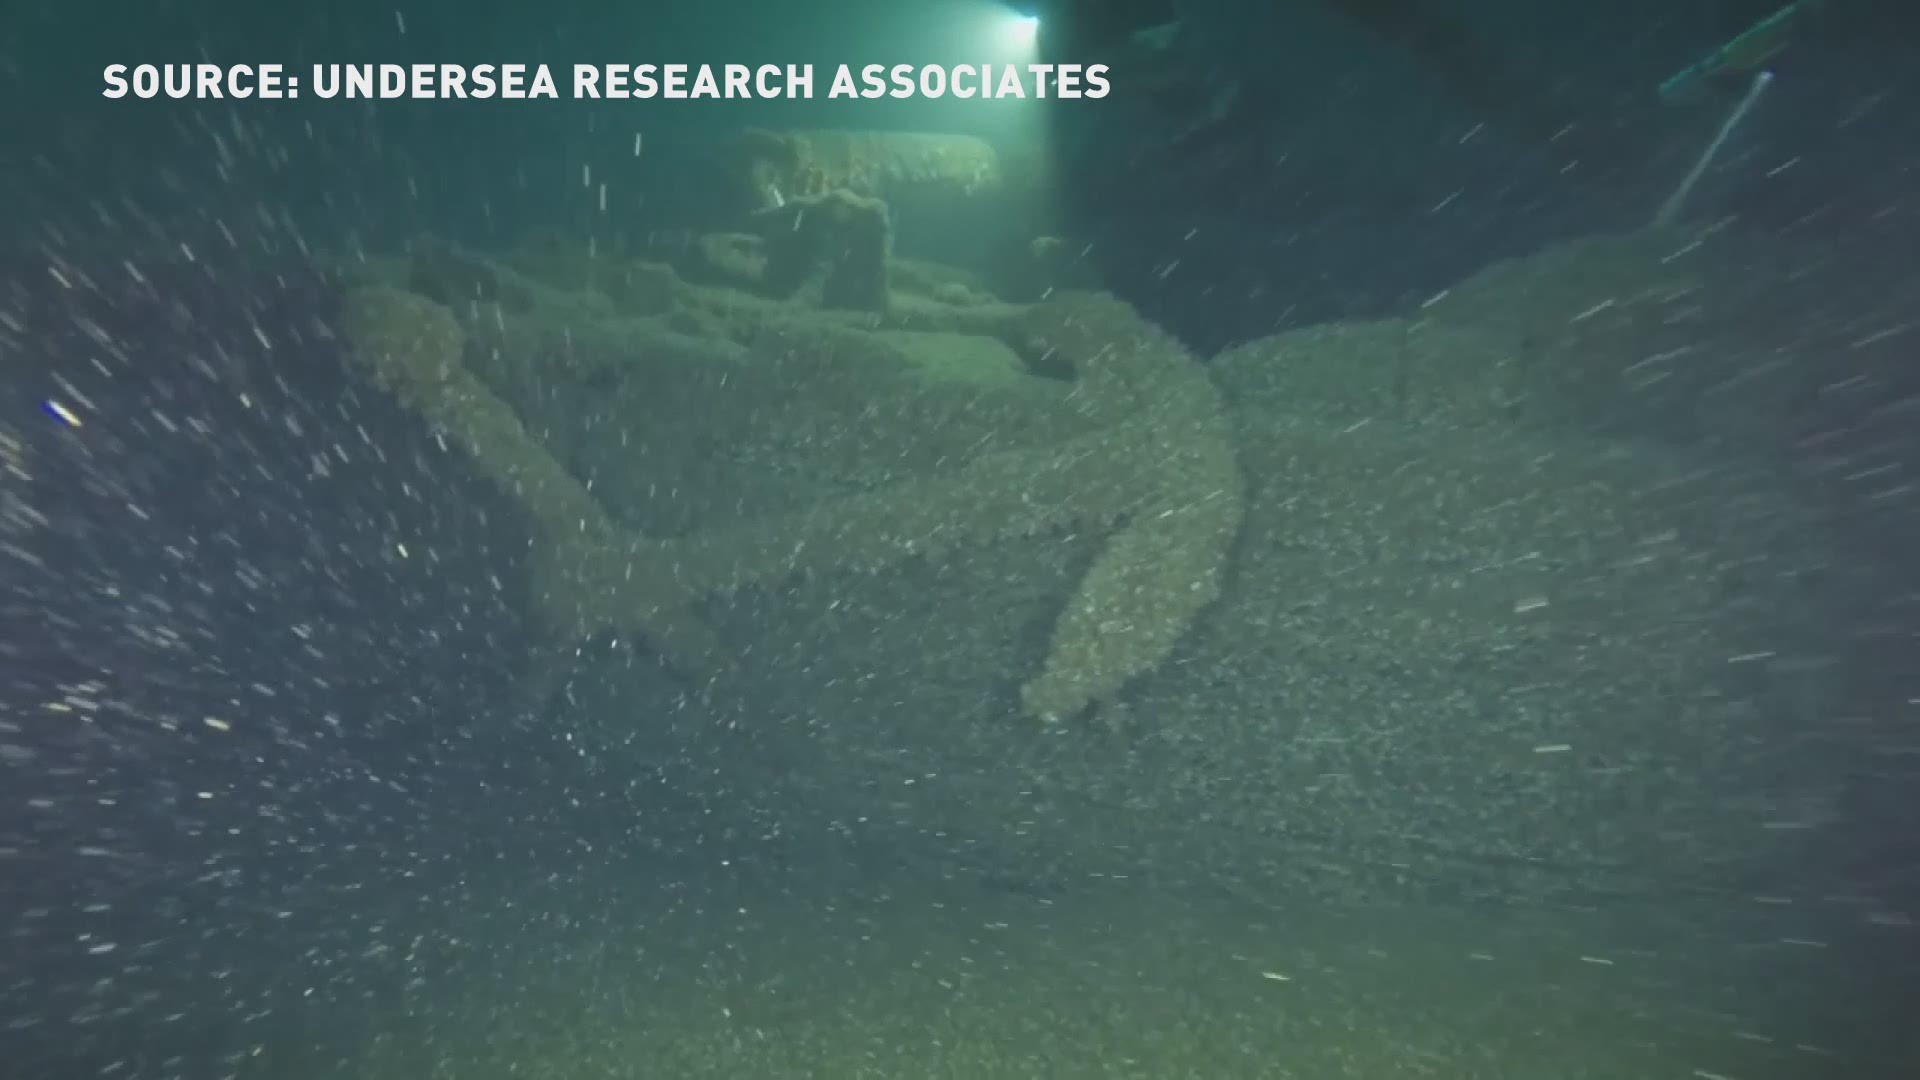 The Venus found itself caught in a gale storm on Lake Huron and wasn't able to get back to port in 1887. David Trotter and his dive team located and identified the Venus in May 2014, then dove the wreck again in the spring of 2016. In the video footage, you'll see several grindstones on the deck and inside the cargo hold of the vessel. Historical records say the Venus was the only ship to founder on Lake Huron carrying grindstones, making the identification easy for Trotter's team.